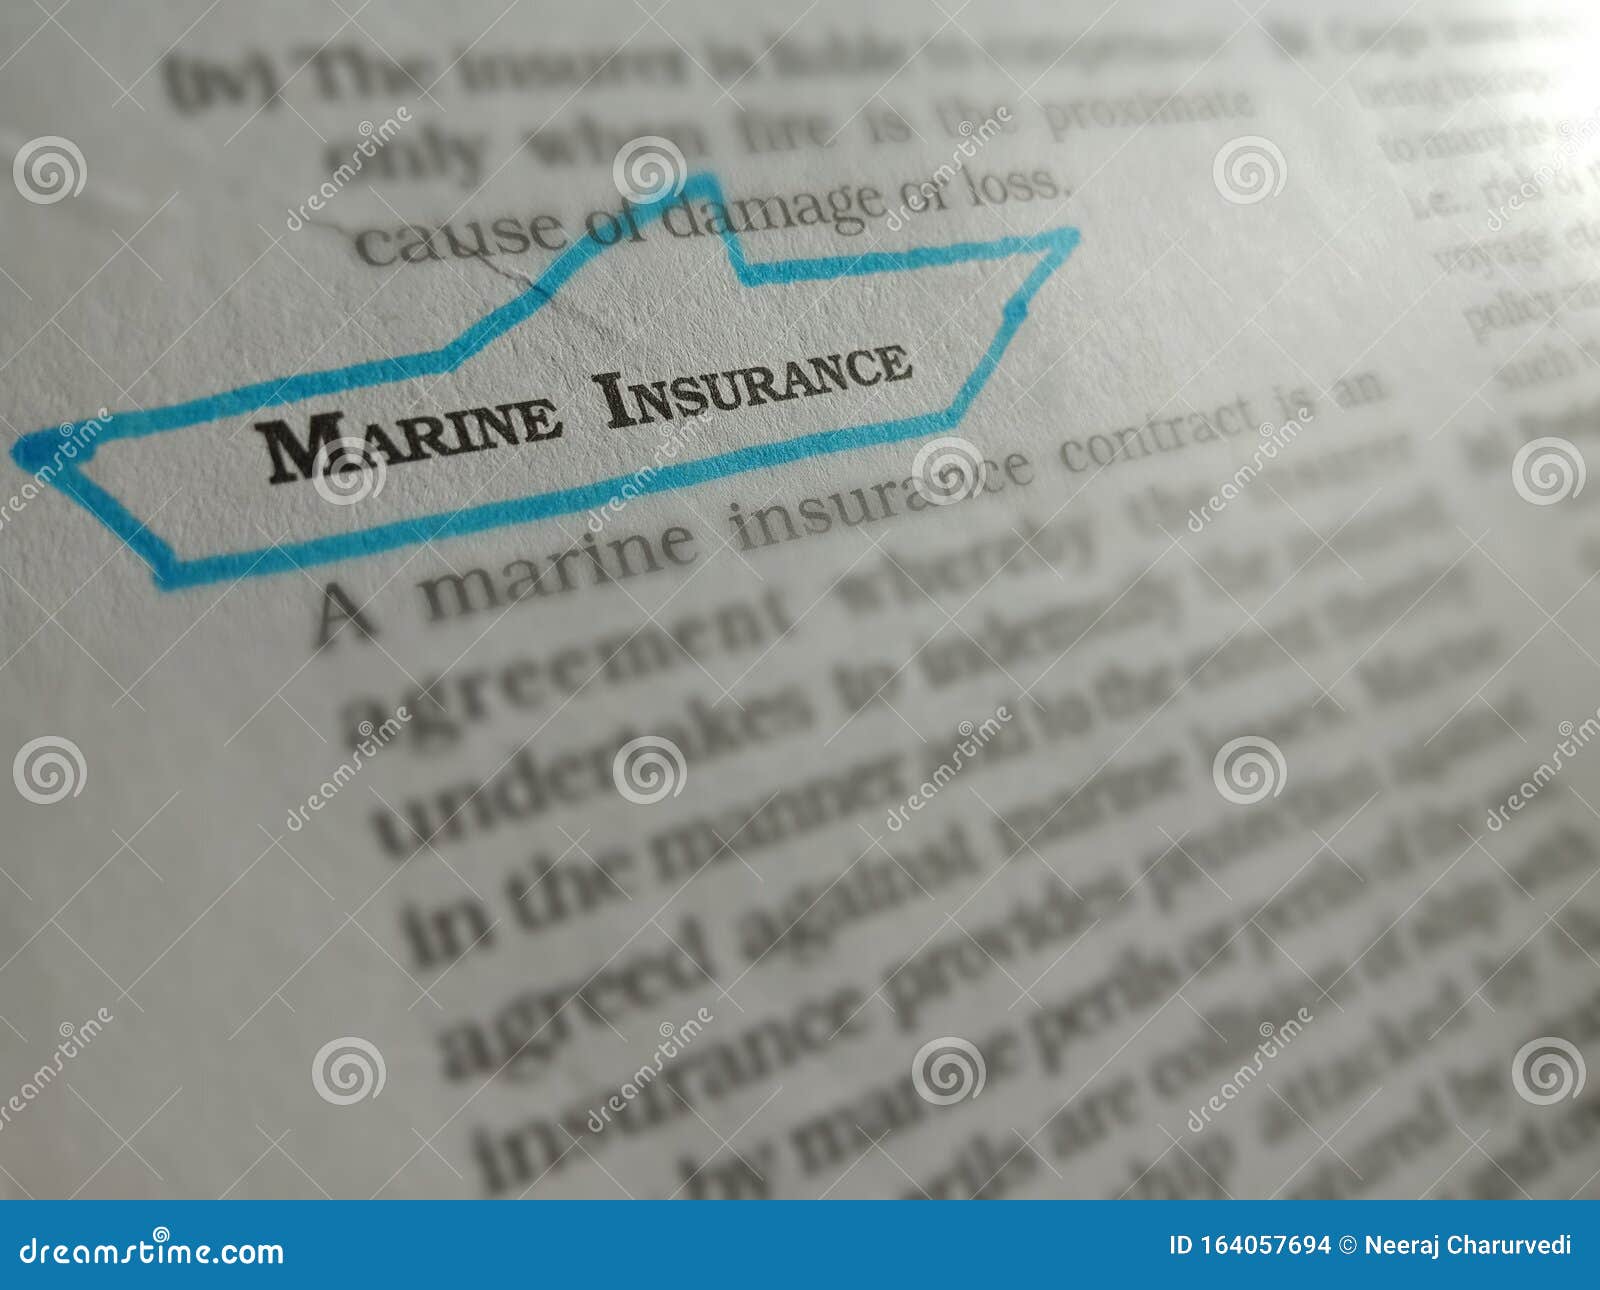 marine insurance transportation related terminology displayed on paper page